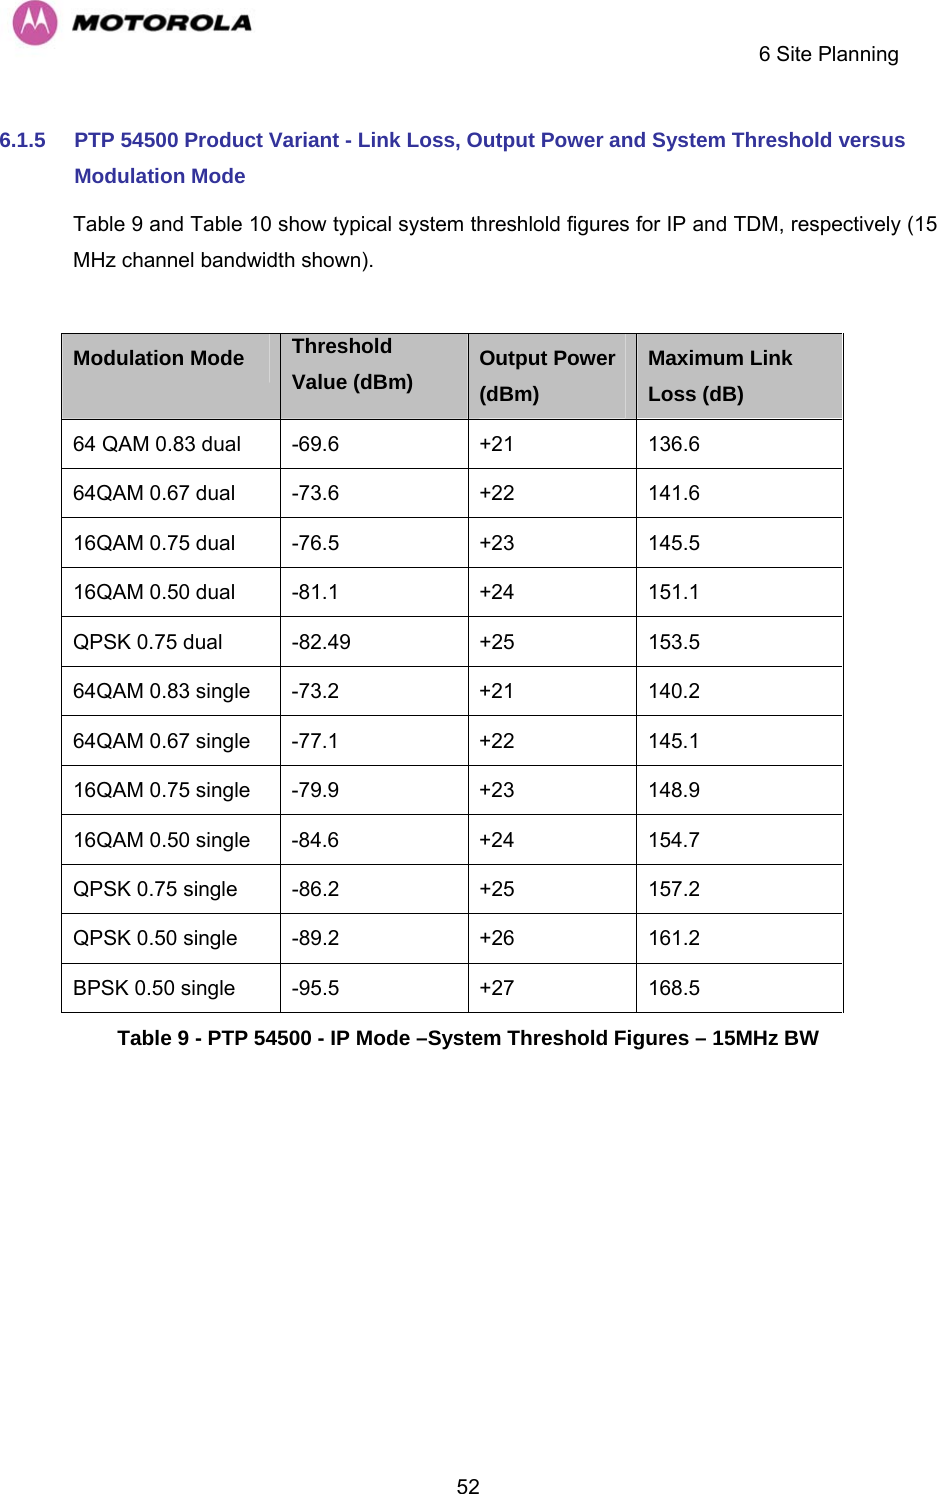     6 Site Planning  526.1.5  PTP 54500 Product Variant - Link Loss, Output Power and System Threshold versus Modulation Mode  Table 9 and Table 10 show typical system threshlold figures for IP and TDM, respectively (15 MHz channel bandwidth shown).  Modulation Mode Threshold Value (dBm) Output Power (dBm) Maximum Link Loss (dB) 64 QAM 0.83 dual  -69.6   +21  136.6 64QAM 0.67 dual  -73.6   +22  141.6 16QAM 0.75 dual  -76.5   +23  145.5 16QAM 0.50 dual  -81.1   +24  151.1 QPSK 0.75 dual  -82.49  +25  153.5 64QAM 0.83 single  -73.2   +21  140.2 64QAM 0.67 single  -77.1   +22  145.1 16QAM 0.75 single  -79.9   +23  148.9 16QAM 0.50 single  -84.6   +24  154.7 QPSK 0.75 single  -86.2   +25  157.2 QPSK 0.50 single  -89.2   +26  161.2 BPSK 0.50 single  -95.5   +27  168.5 Table 9 - PTP 54500 - IP Mode –System Threshold Figures – 15MHz BW 